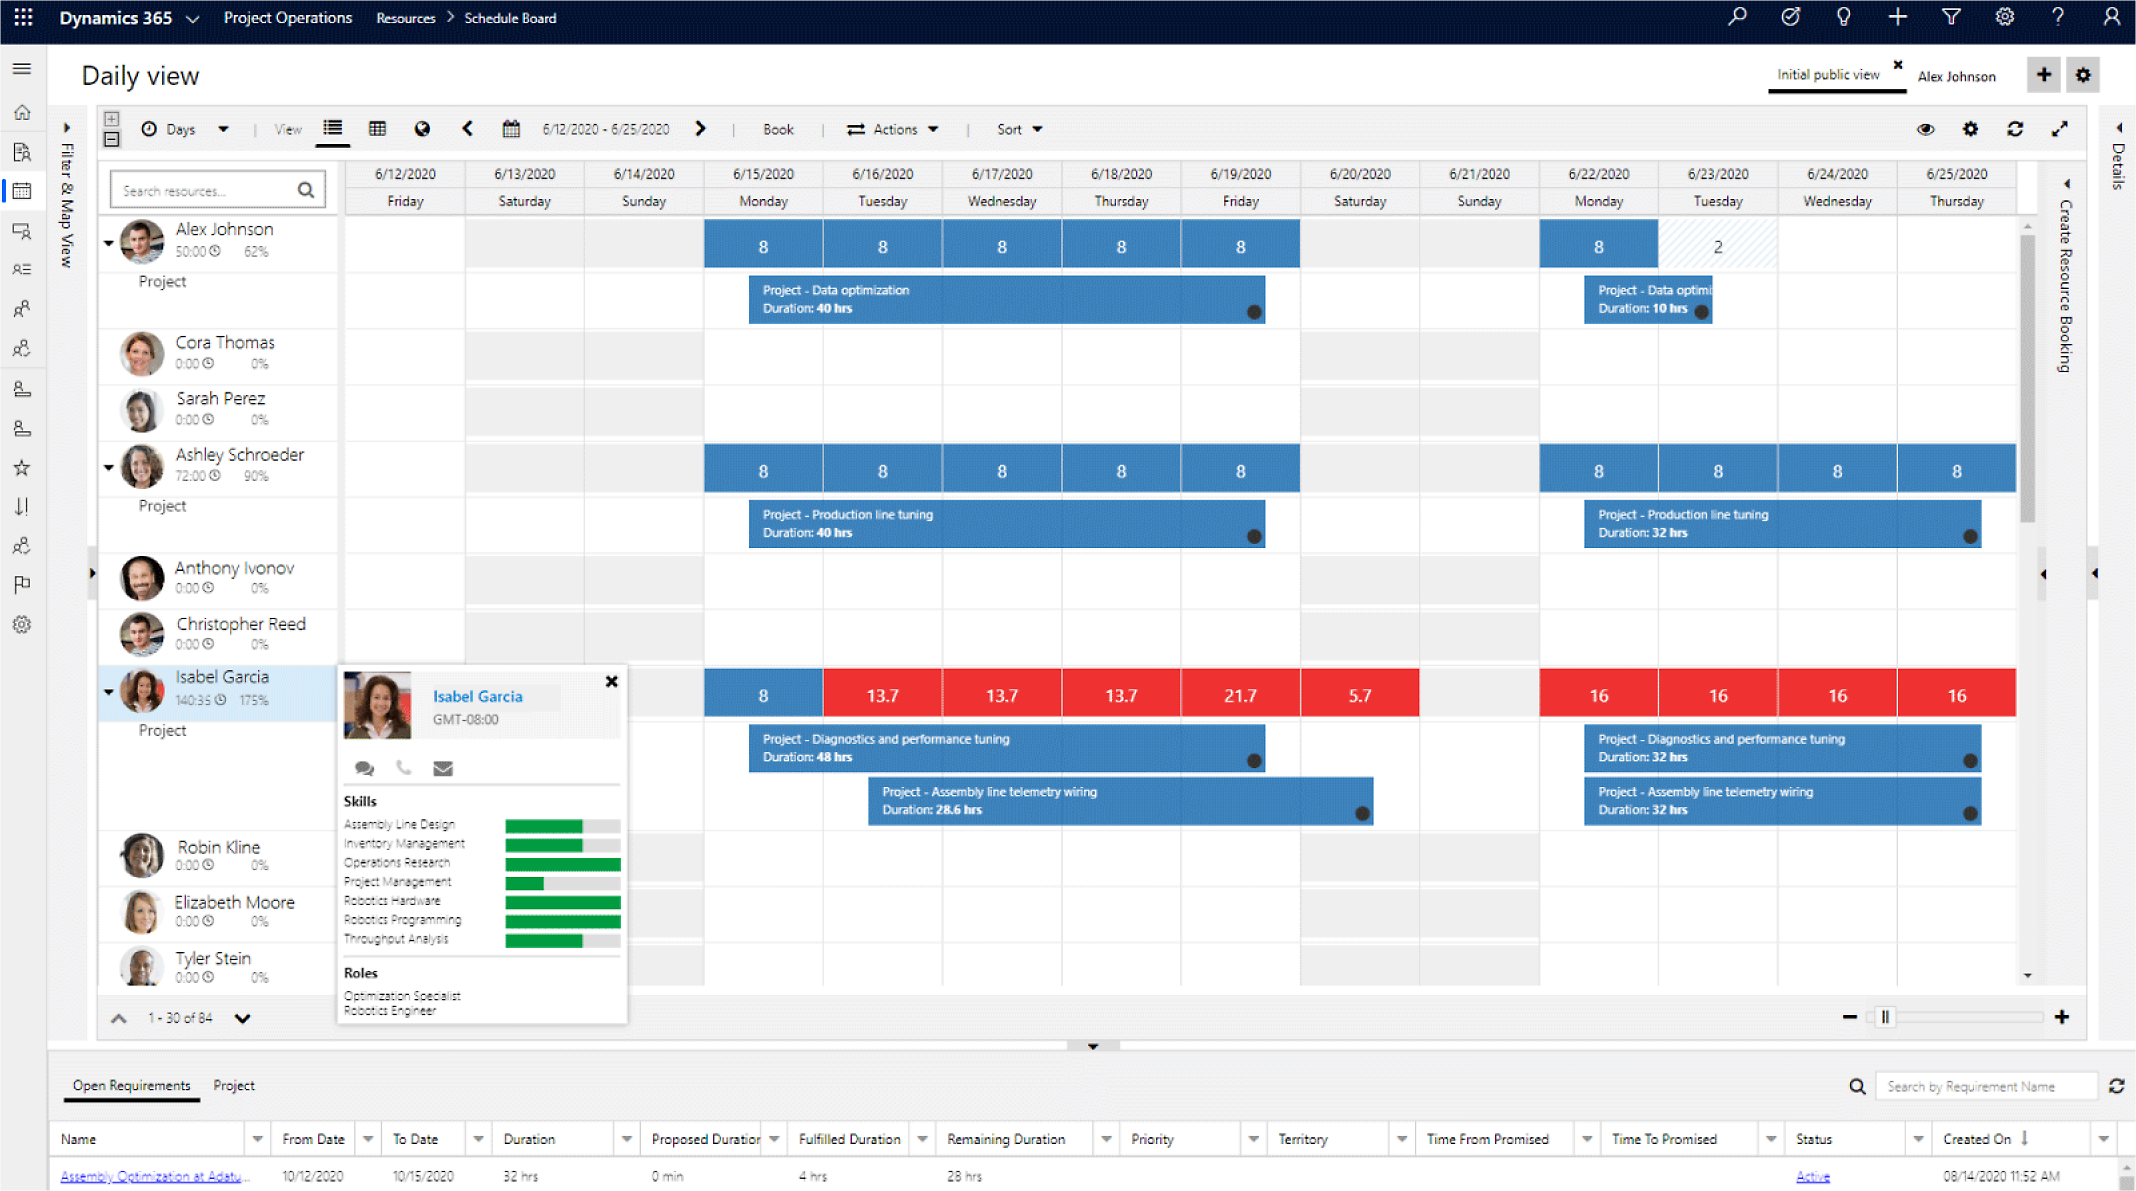 A screenshot of a computer interface showing a detailed project management software with a daily calendar view of tasks